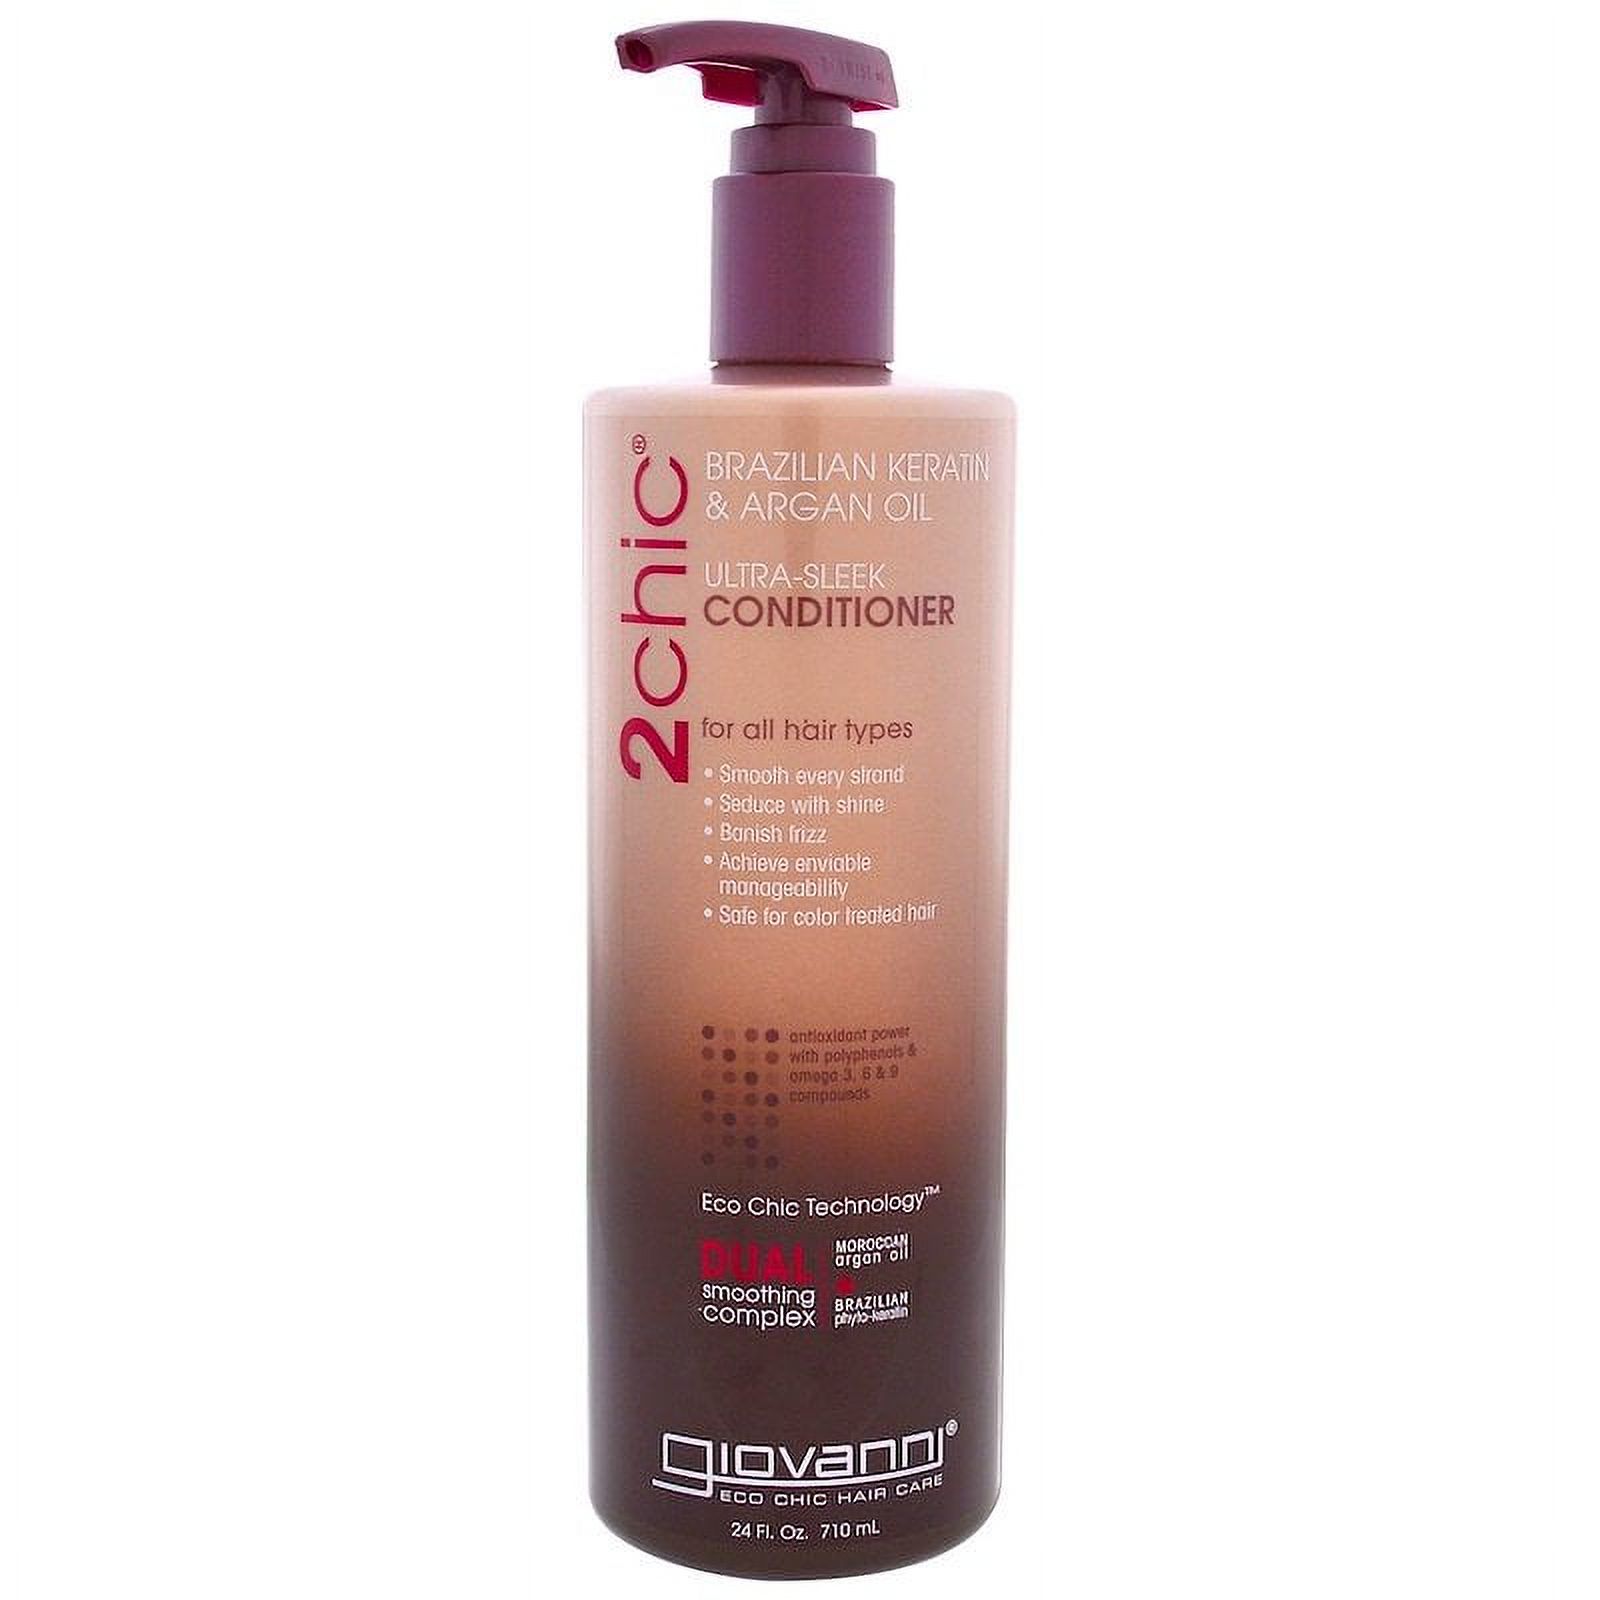 Giovanni Ultra Sleek Conditioner Brazilian Keratin and Argan Oil, Sulfate Free, No Parabens, 24 oz with Pump - image 1 of 7